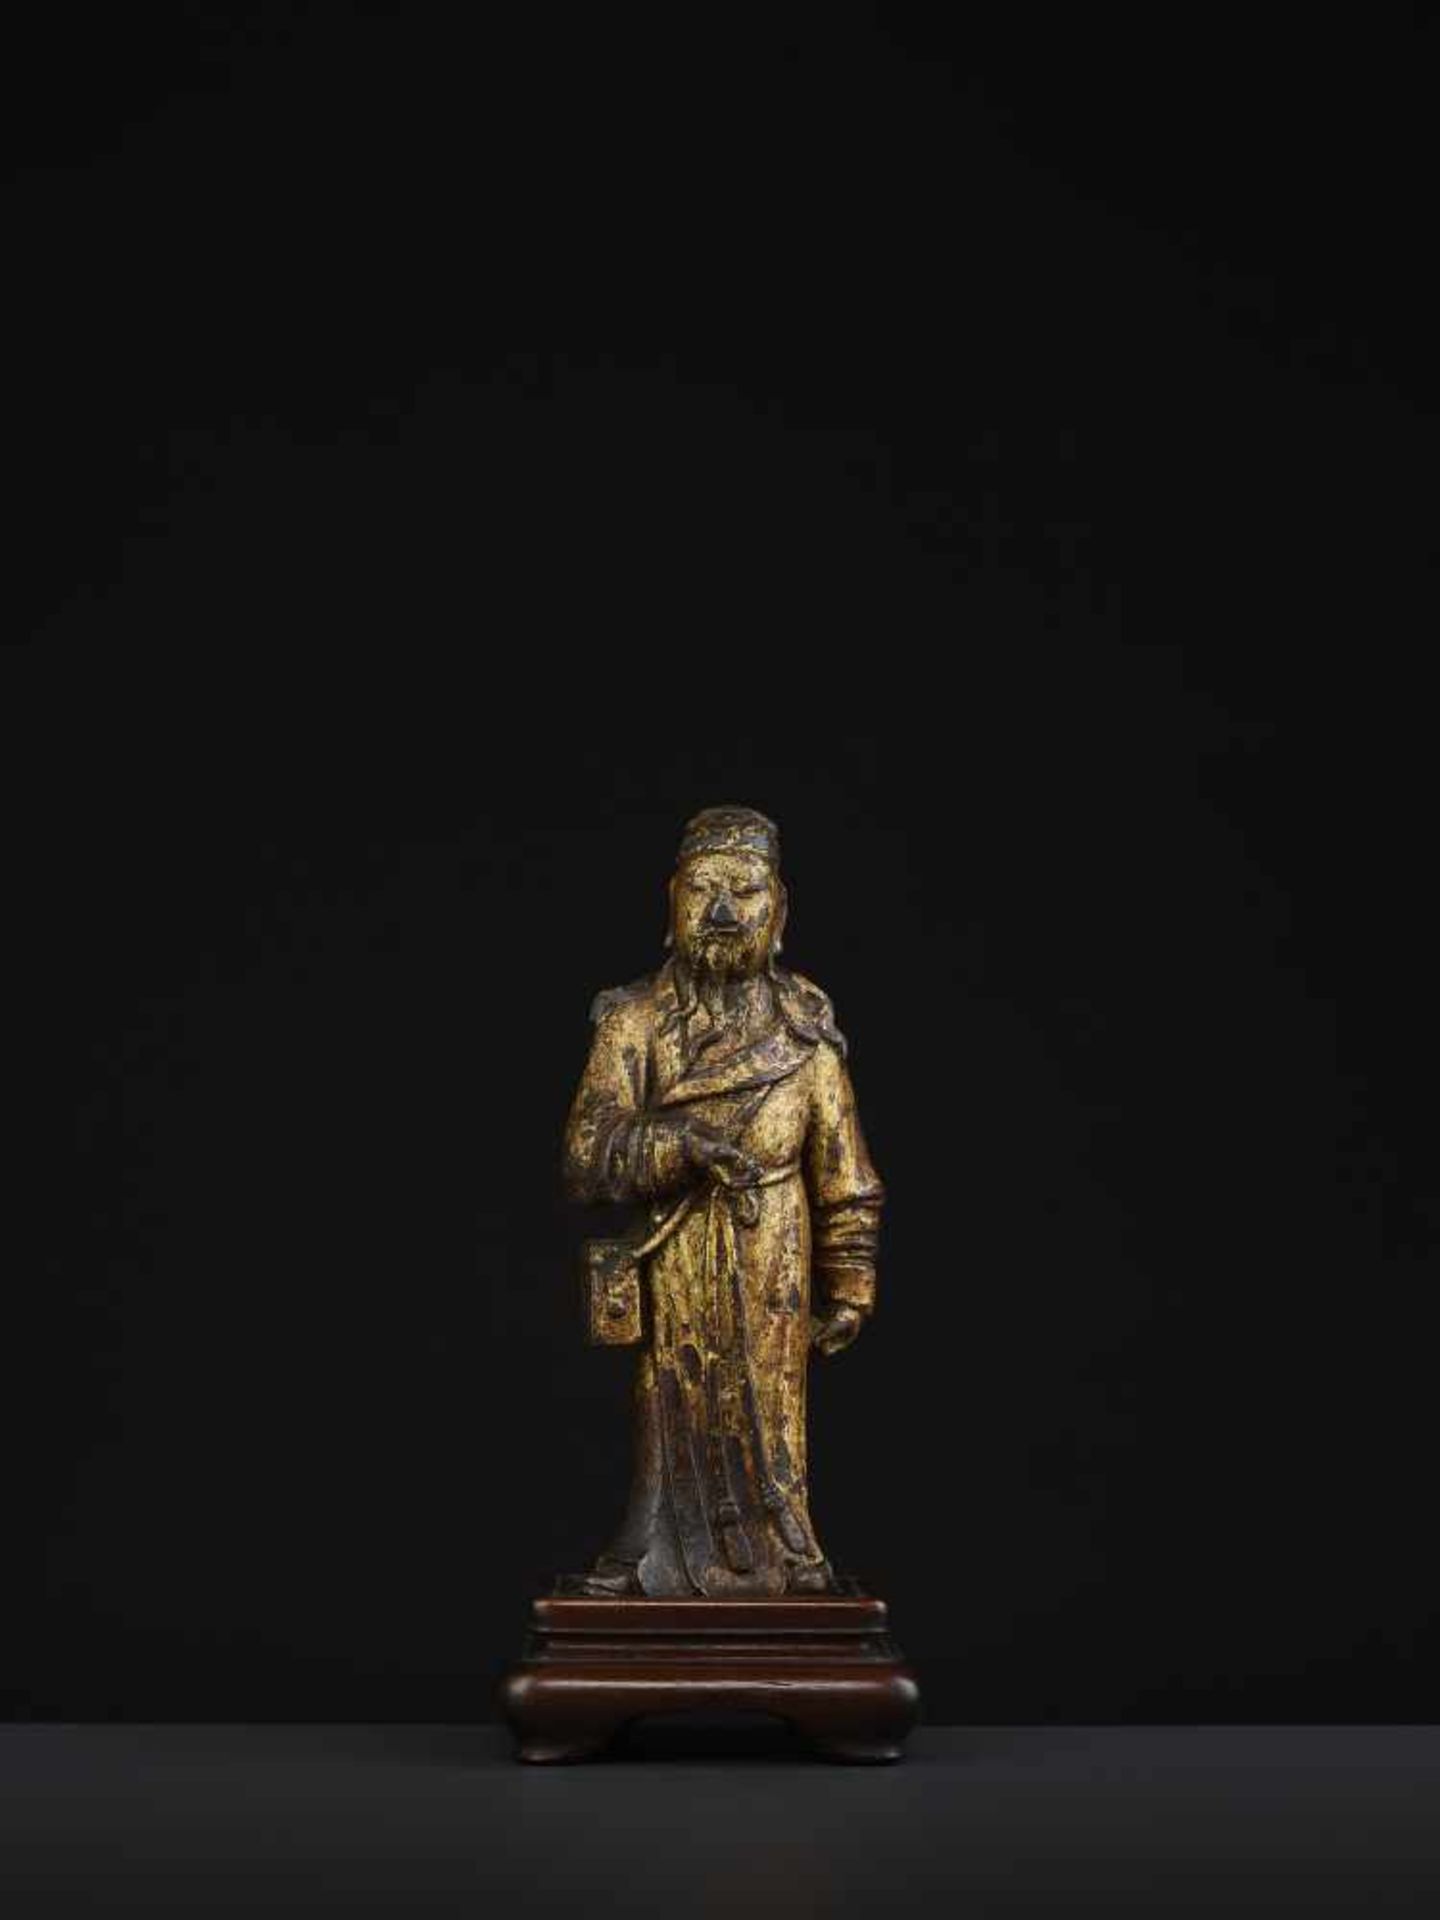 A MING DAOIST IMMORTAL BRONZEChina 16th - 17th century. The bronze with a rich gold lacquer coating. - Image 2 of 10